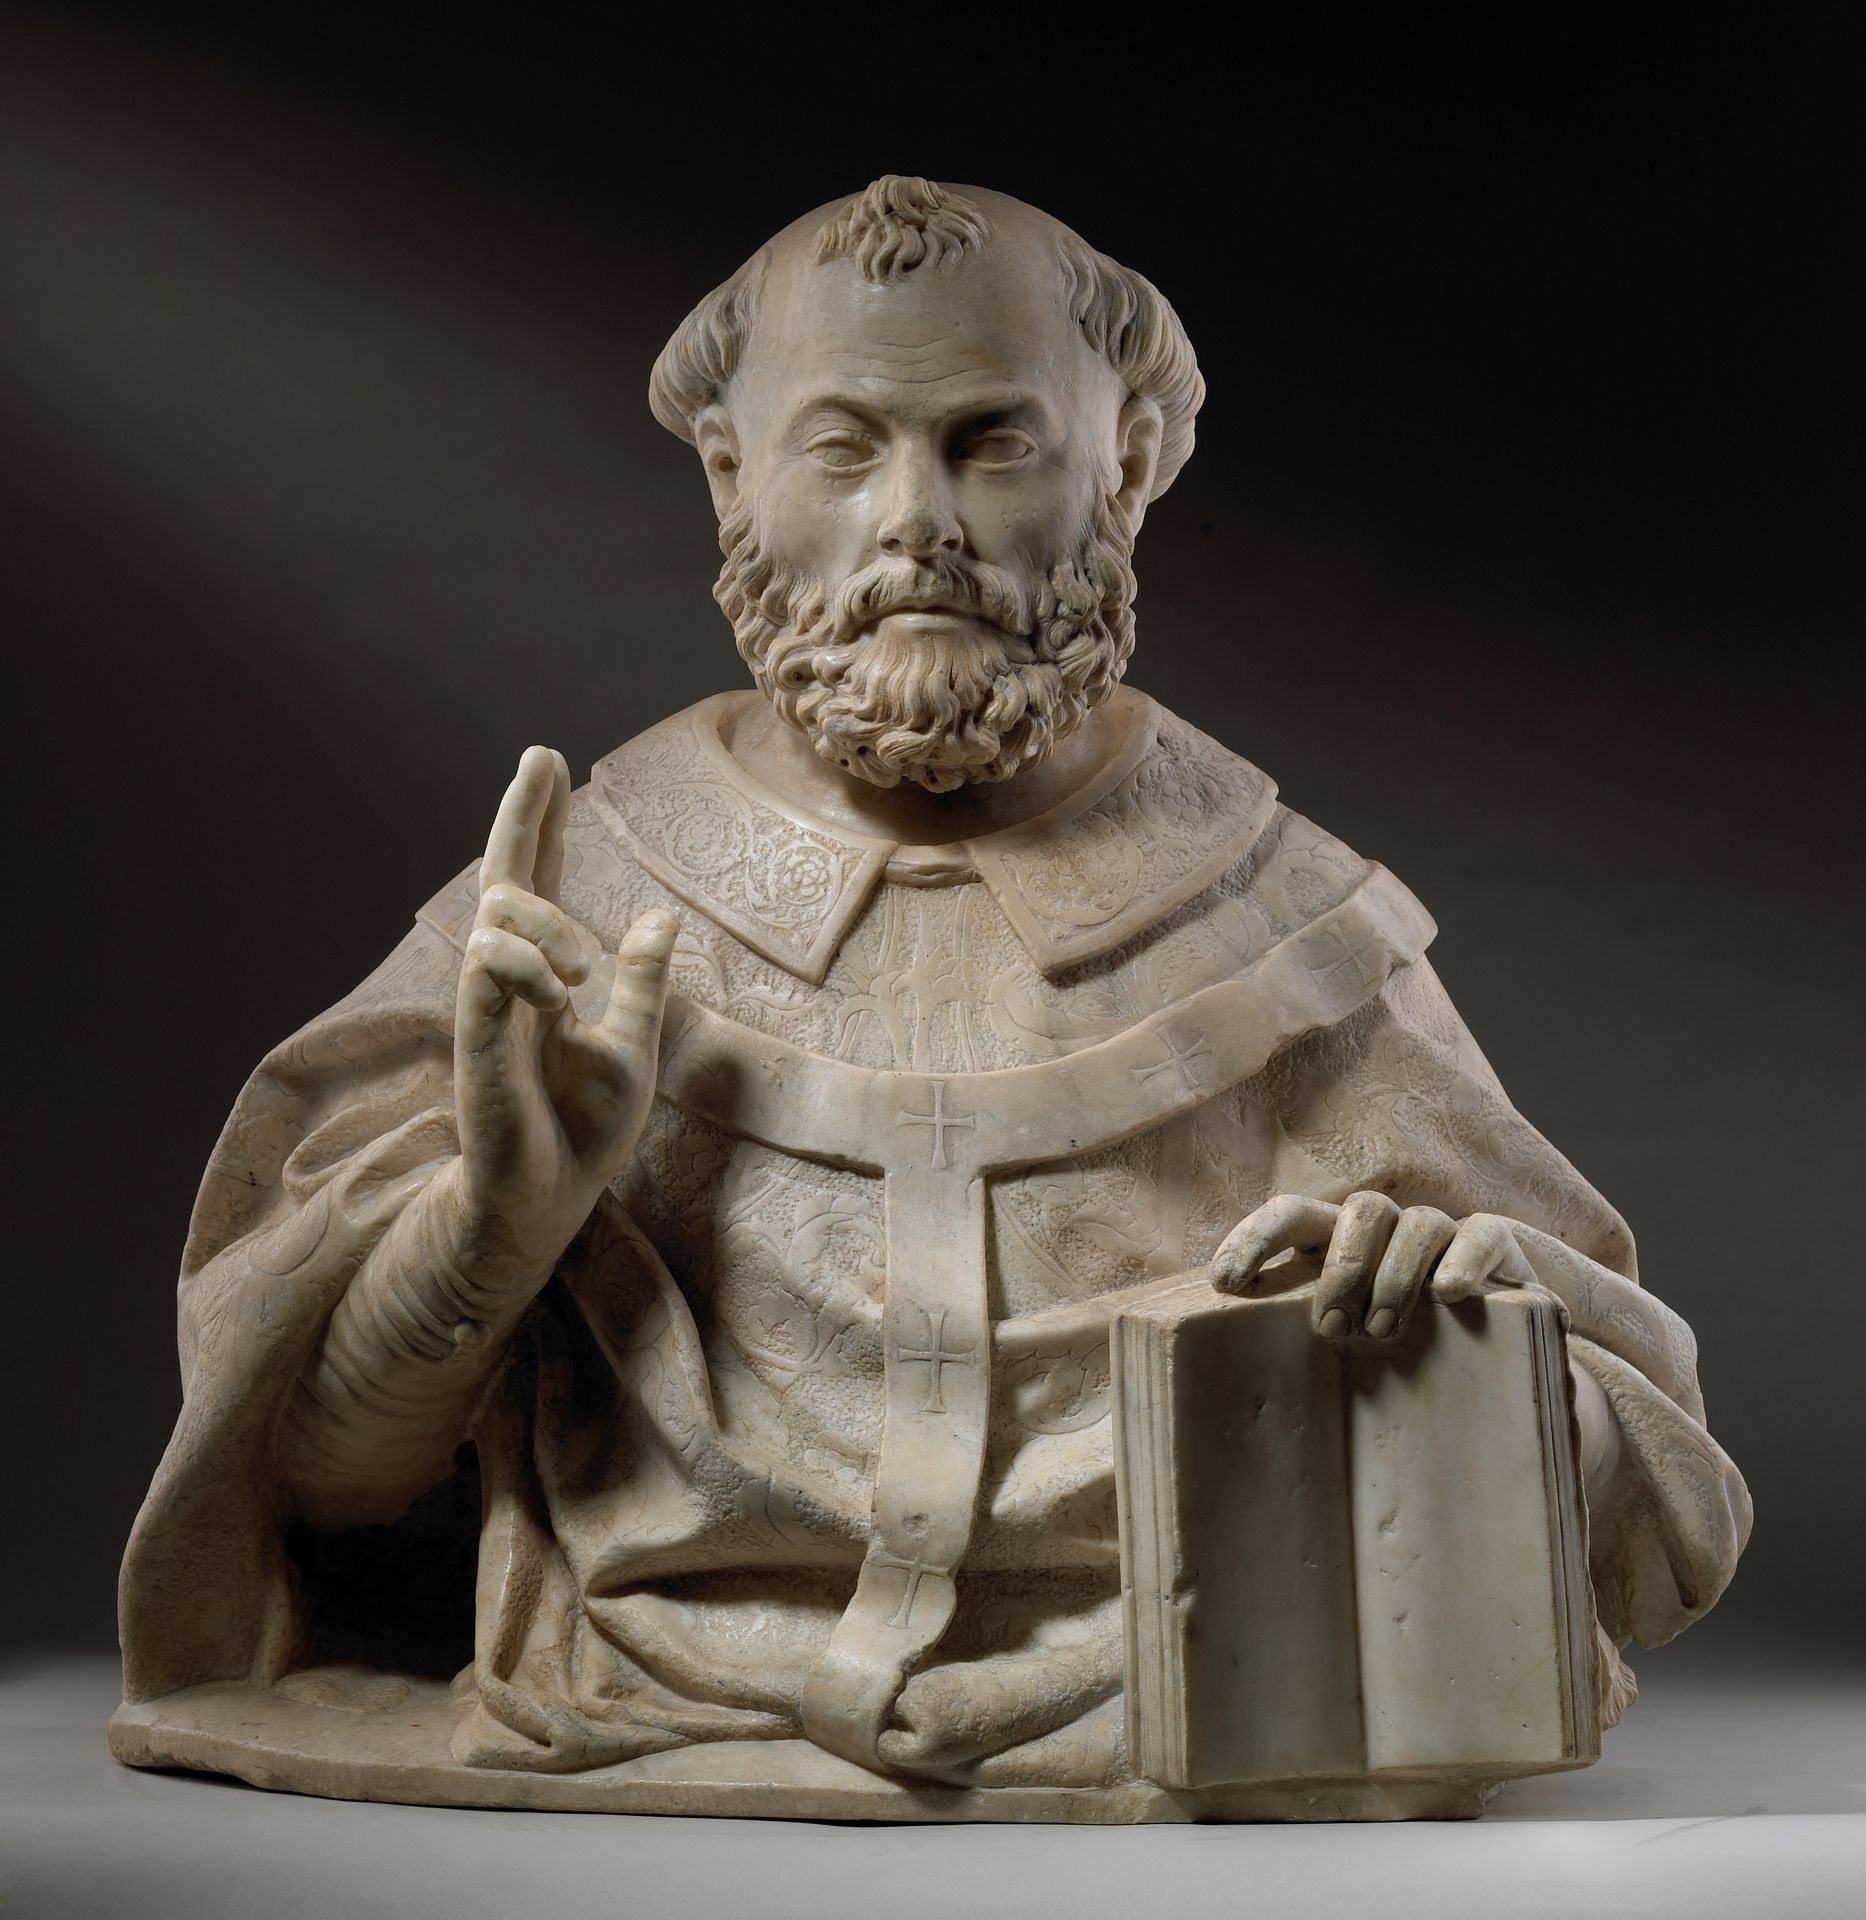 Null BUST OF A SAINT BISHOP

Italy, Venice, Xth century

Marble

66 x 66 x 33 cm&hellip;